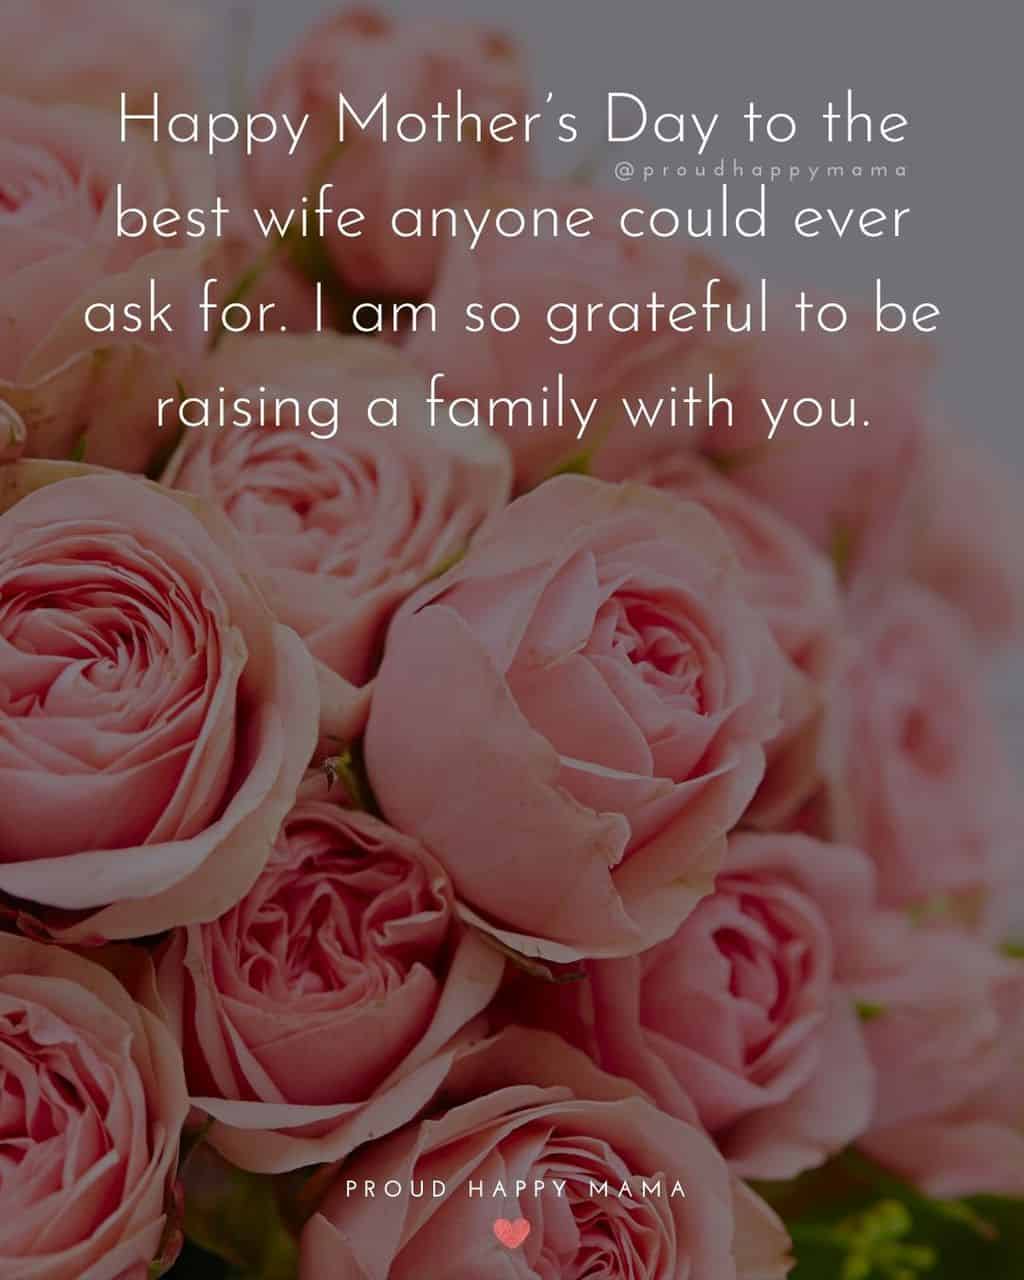 Happy Mothers Day Quotes For Wife - Happy Mother’s Day to the best wife anyone could ever ask for. I am so grateful to be